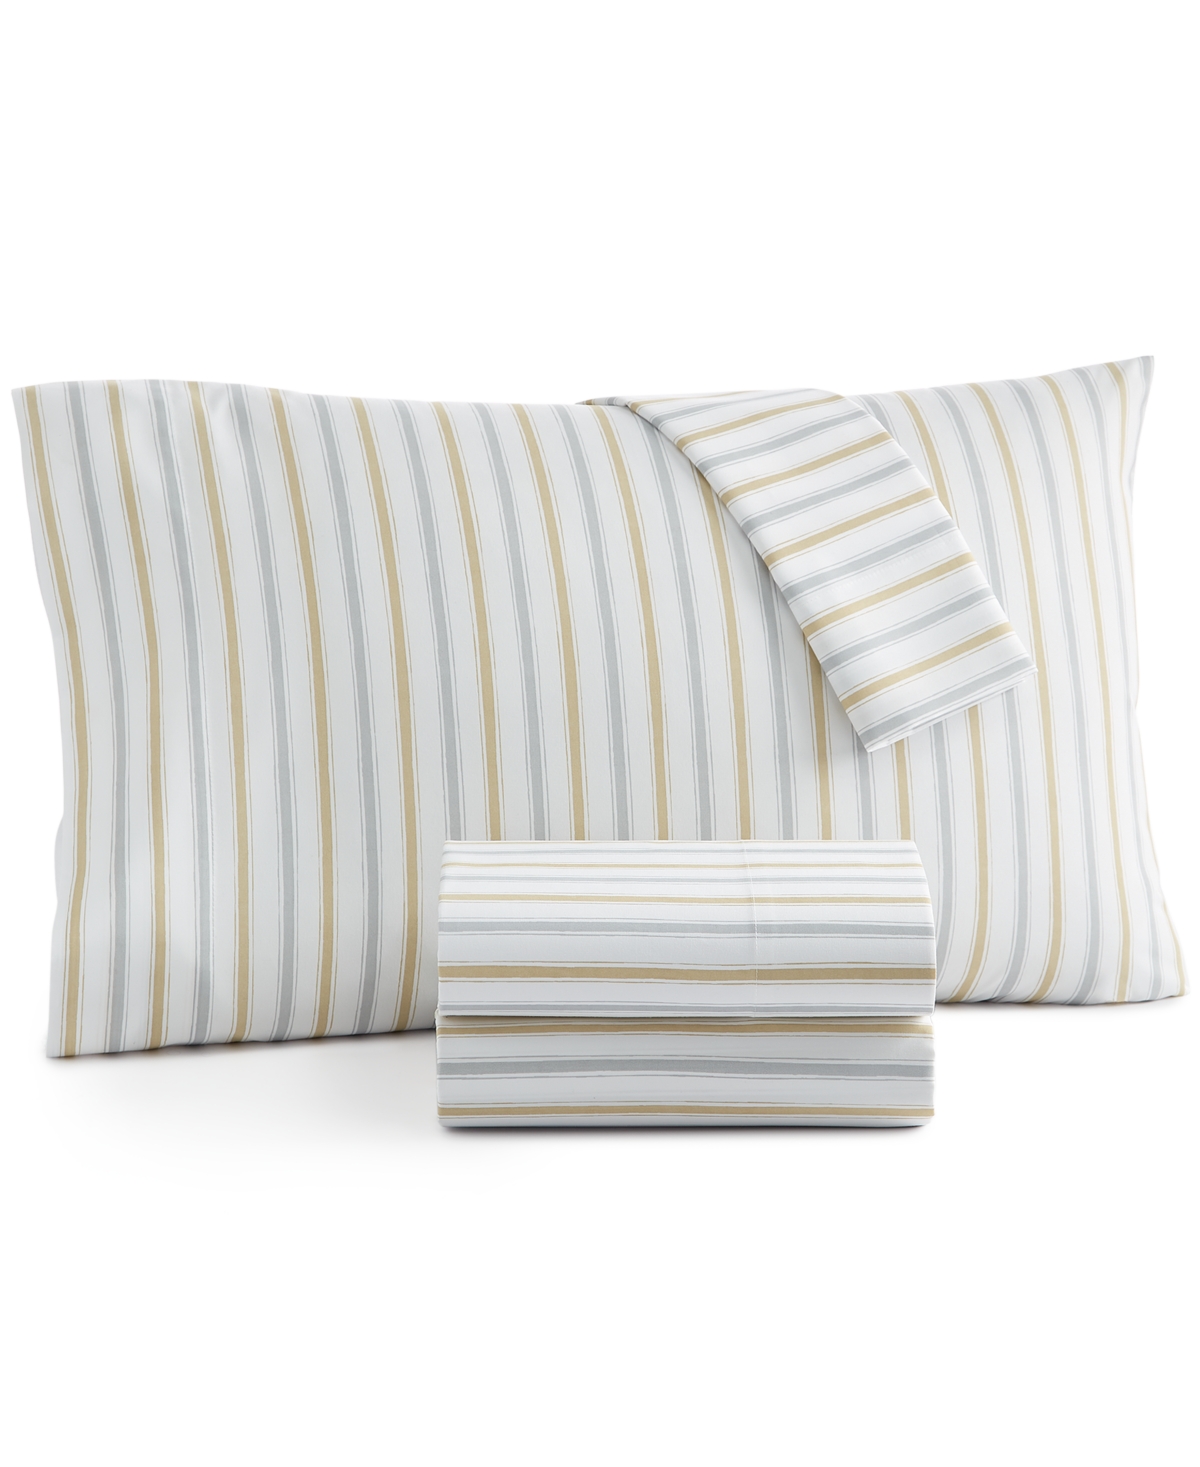 Home Design Easy Care Printed Microfiber 4-pc. Sheet Set, King, Created For Macy's In Neutral Stripe